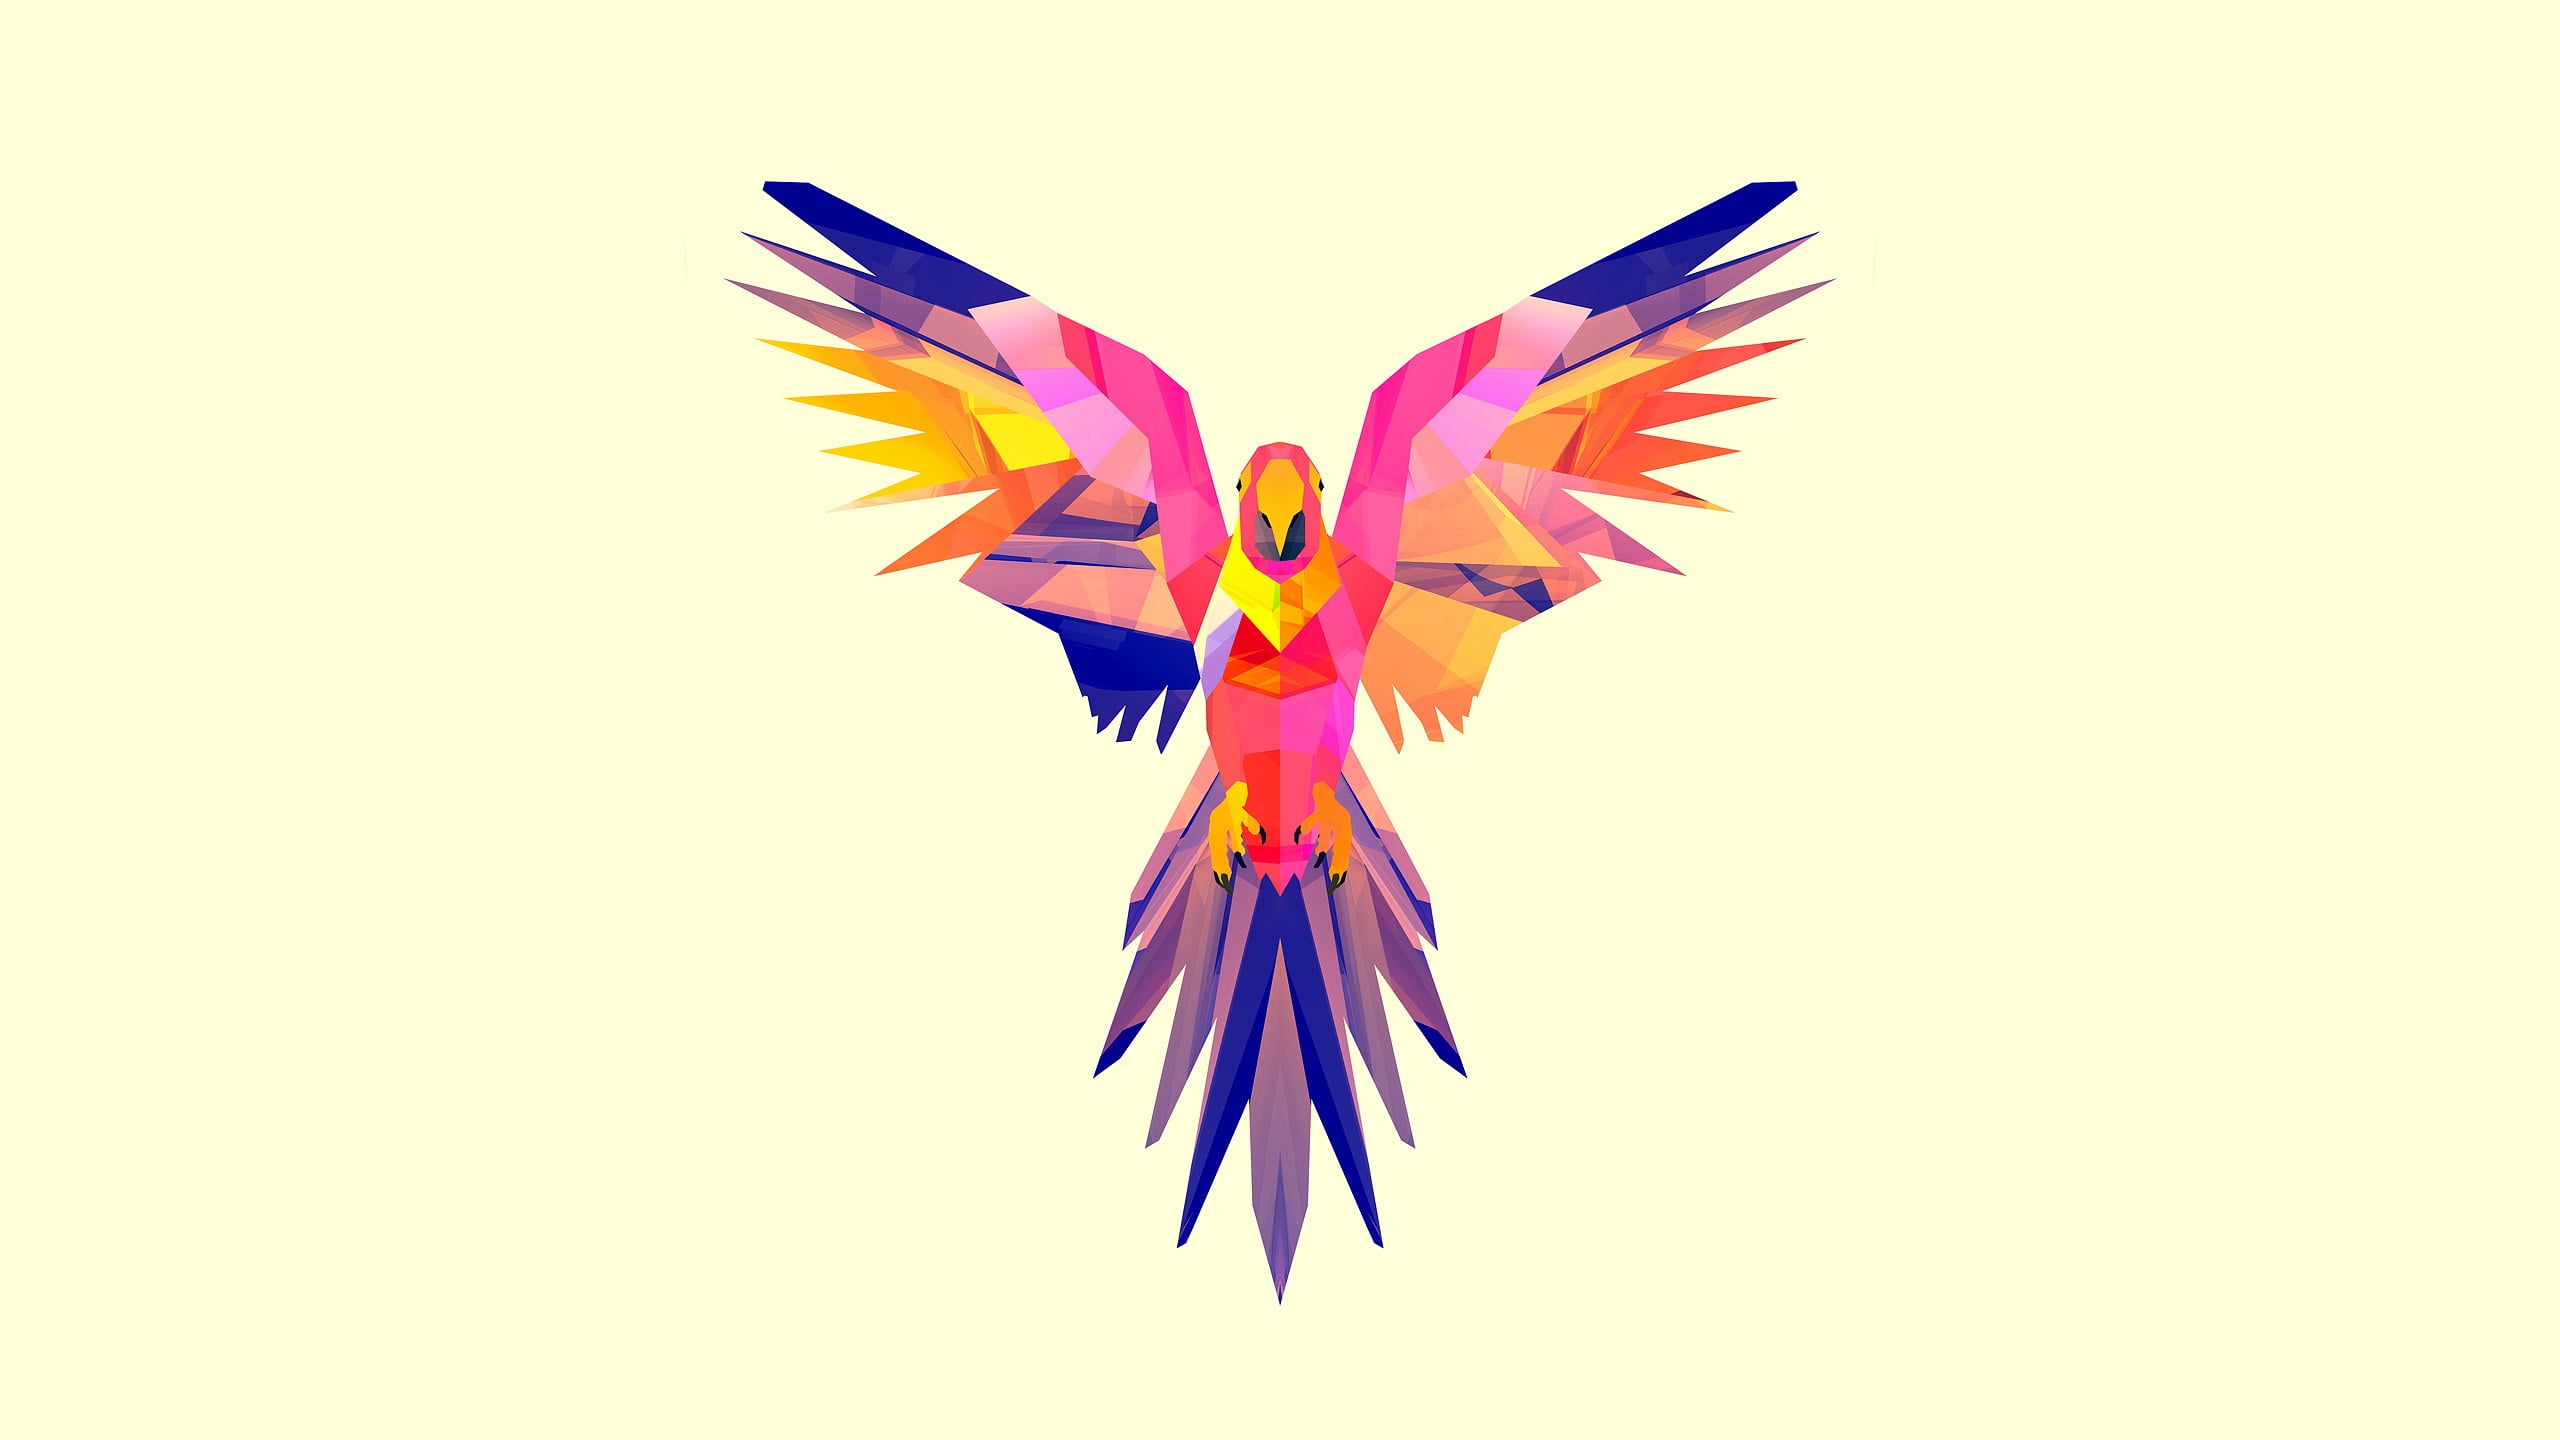 bird flying with purple and pink colored body illustration